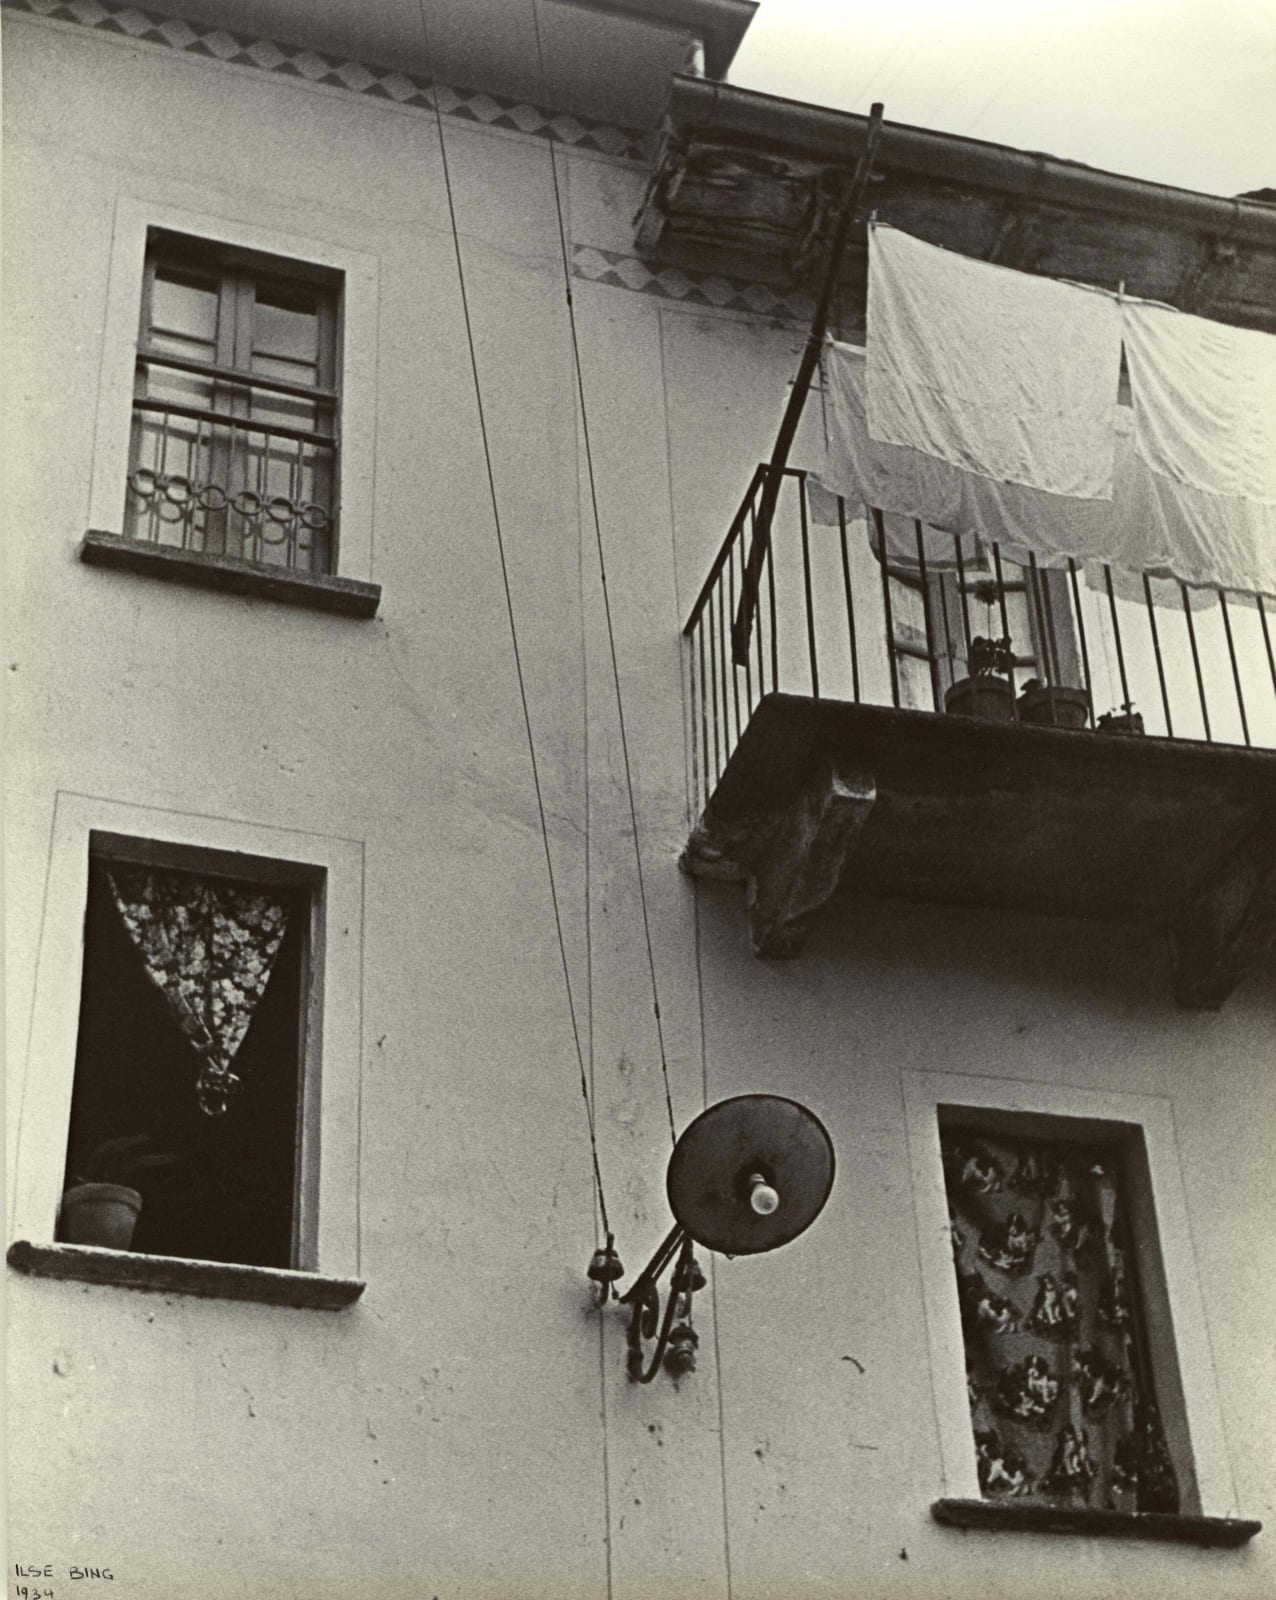 Ilse Bing photograph of windows and balcony with laundry in Switzerland